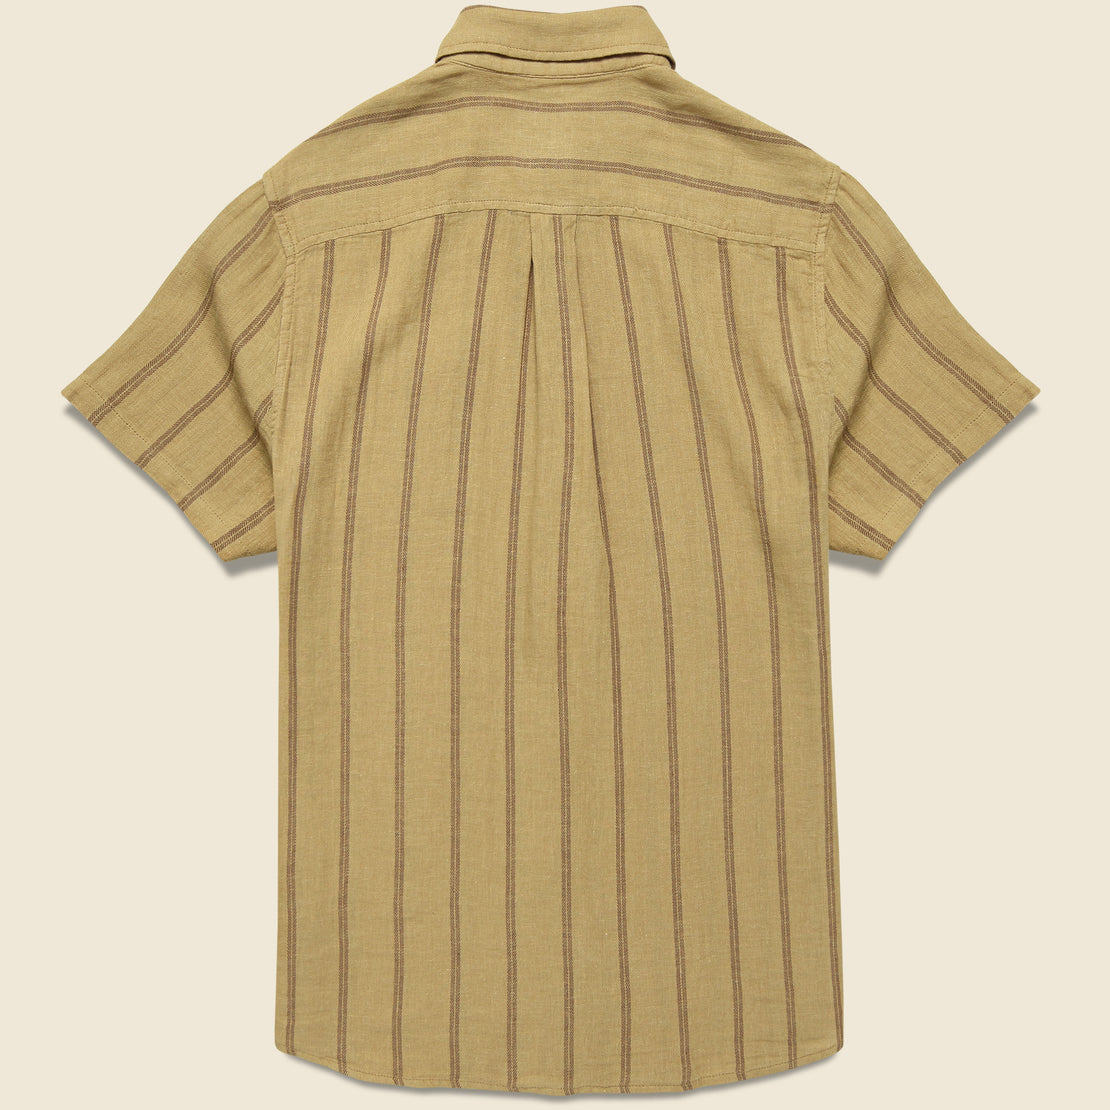 Alan Shirt - Brass - Katin - STAG Provisions - Tops - S/S Woven - Stripe